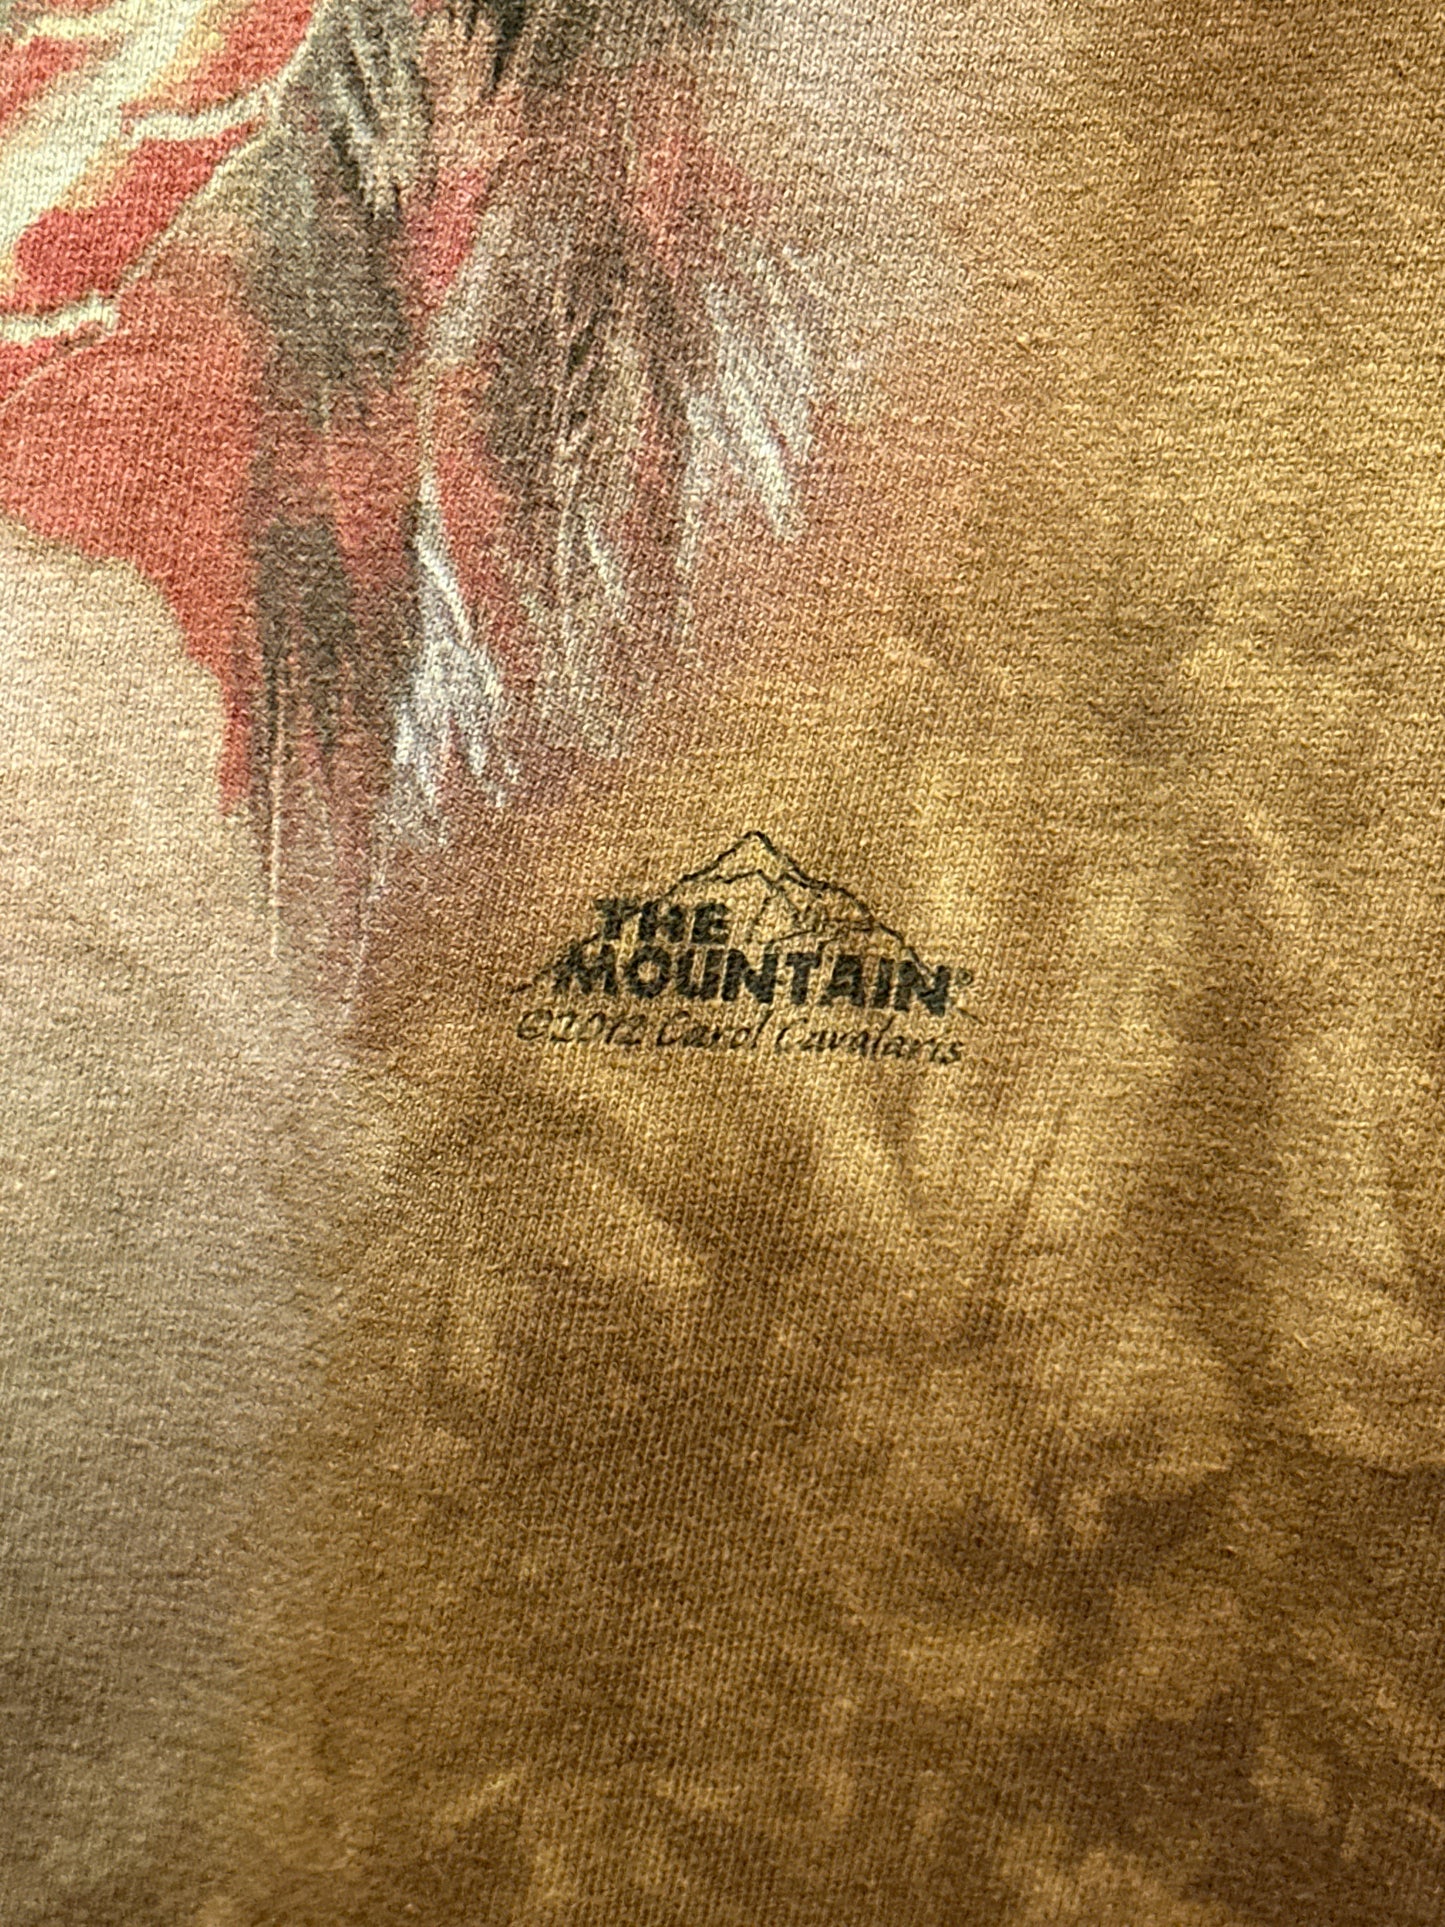 The Mountain Native American Wolf Nature T-Shirt XL